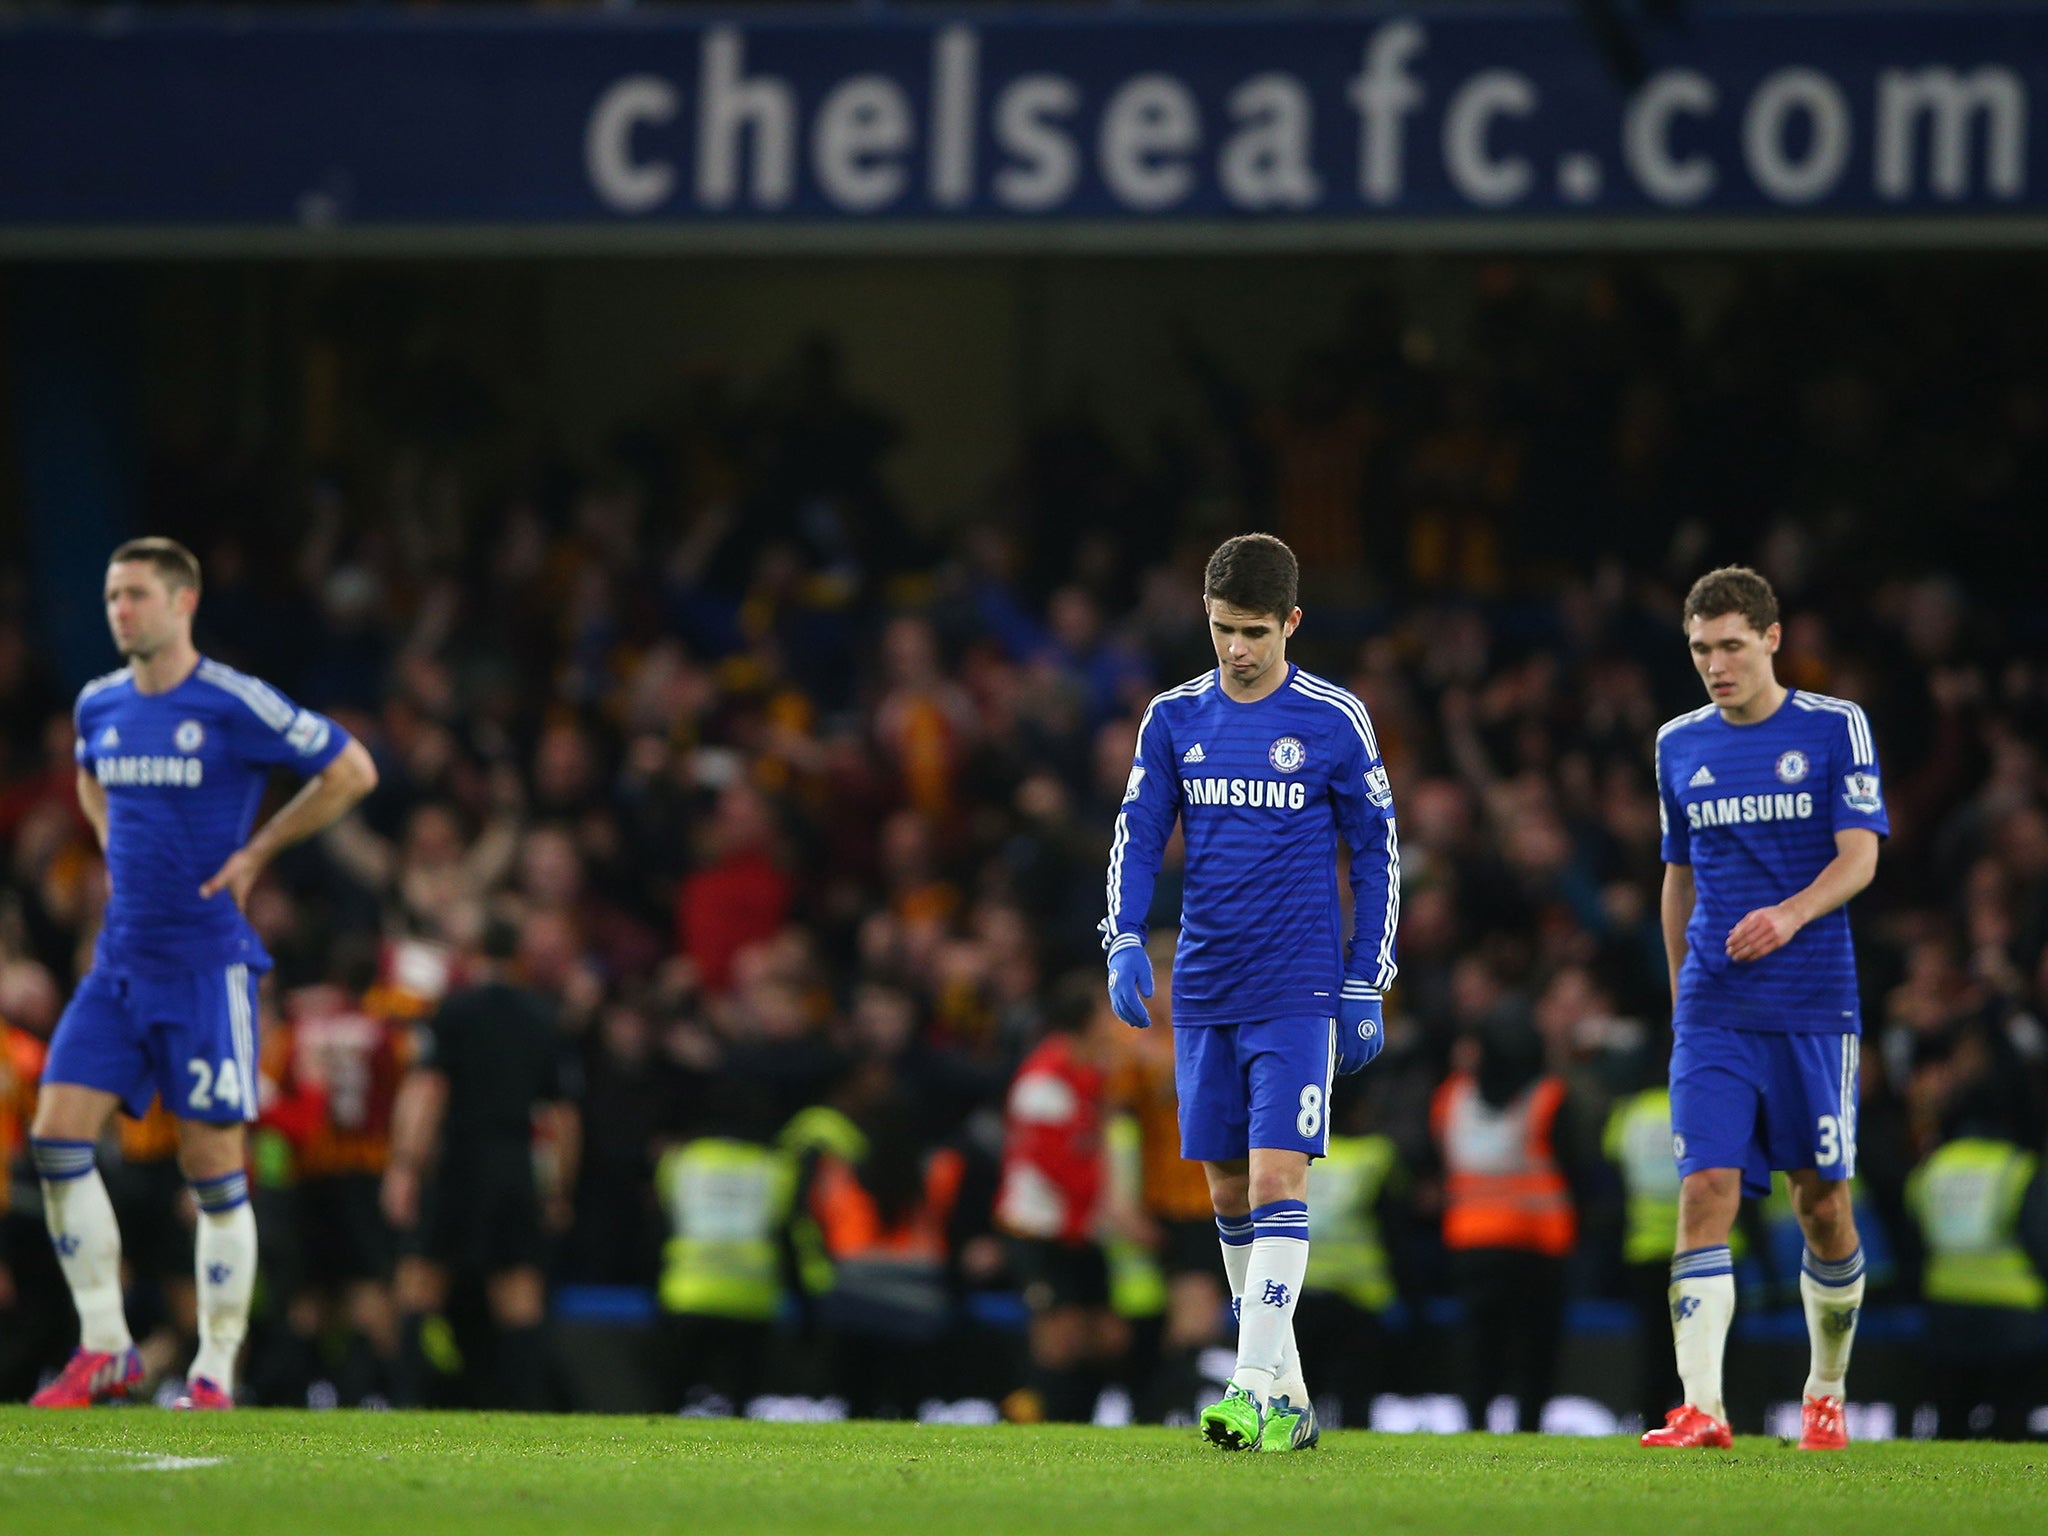 Chelsea players react after conceding at Stamford Bridge